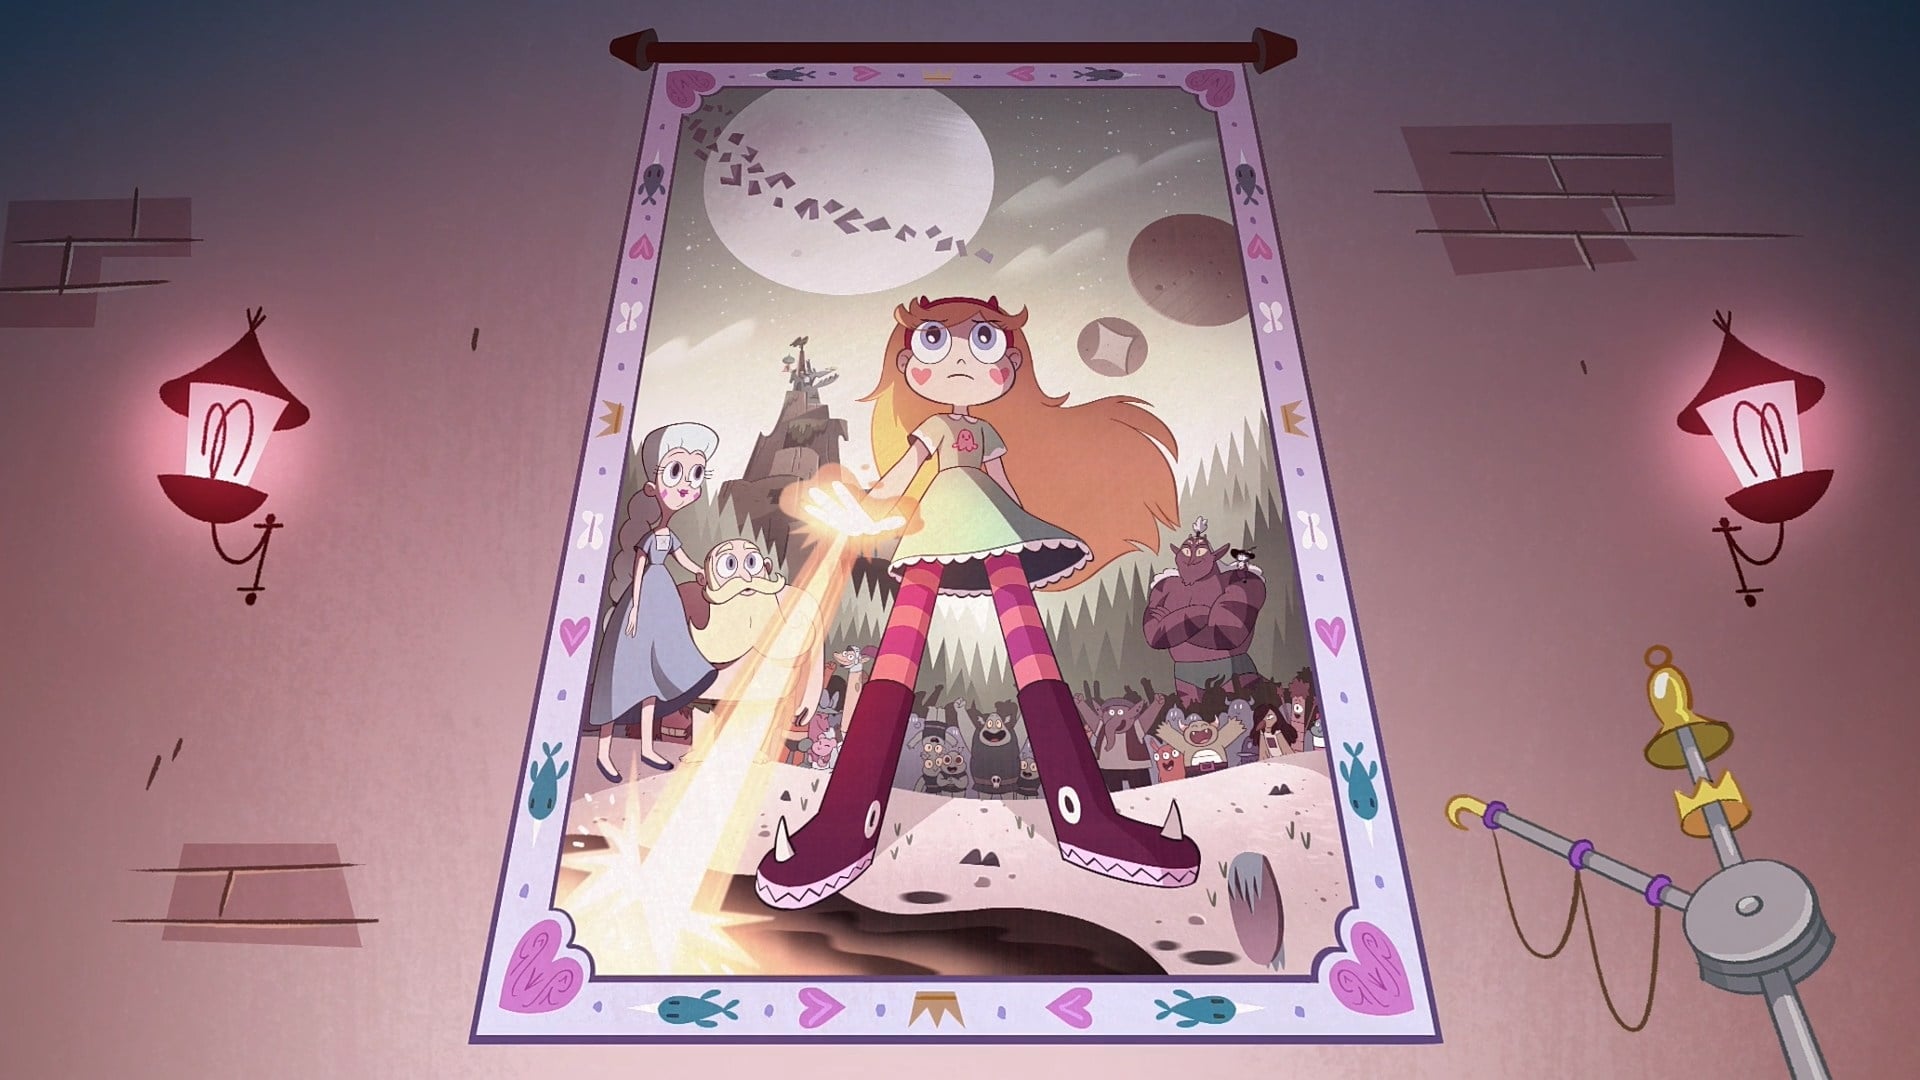 Star vs. the Forces of Evil: Season 4 Episode 37. 